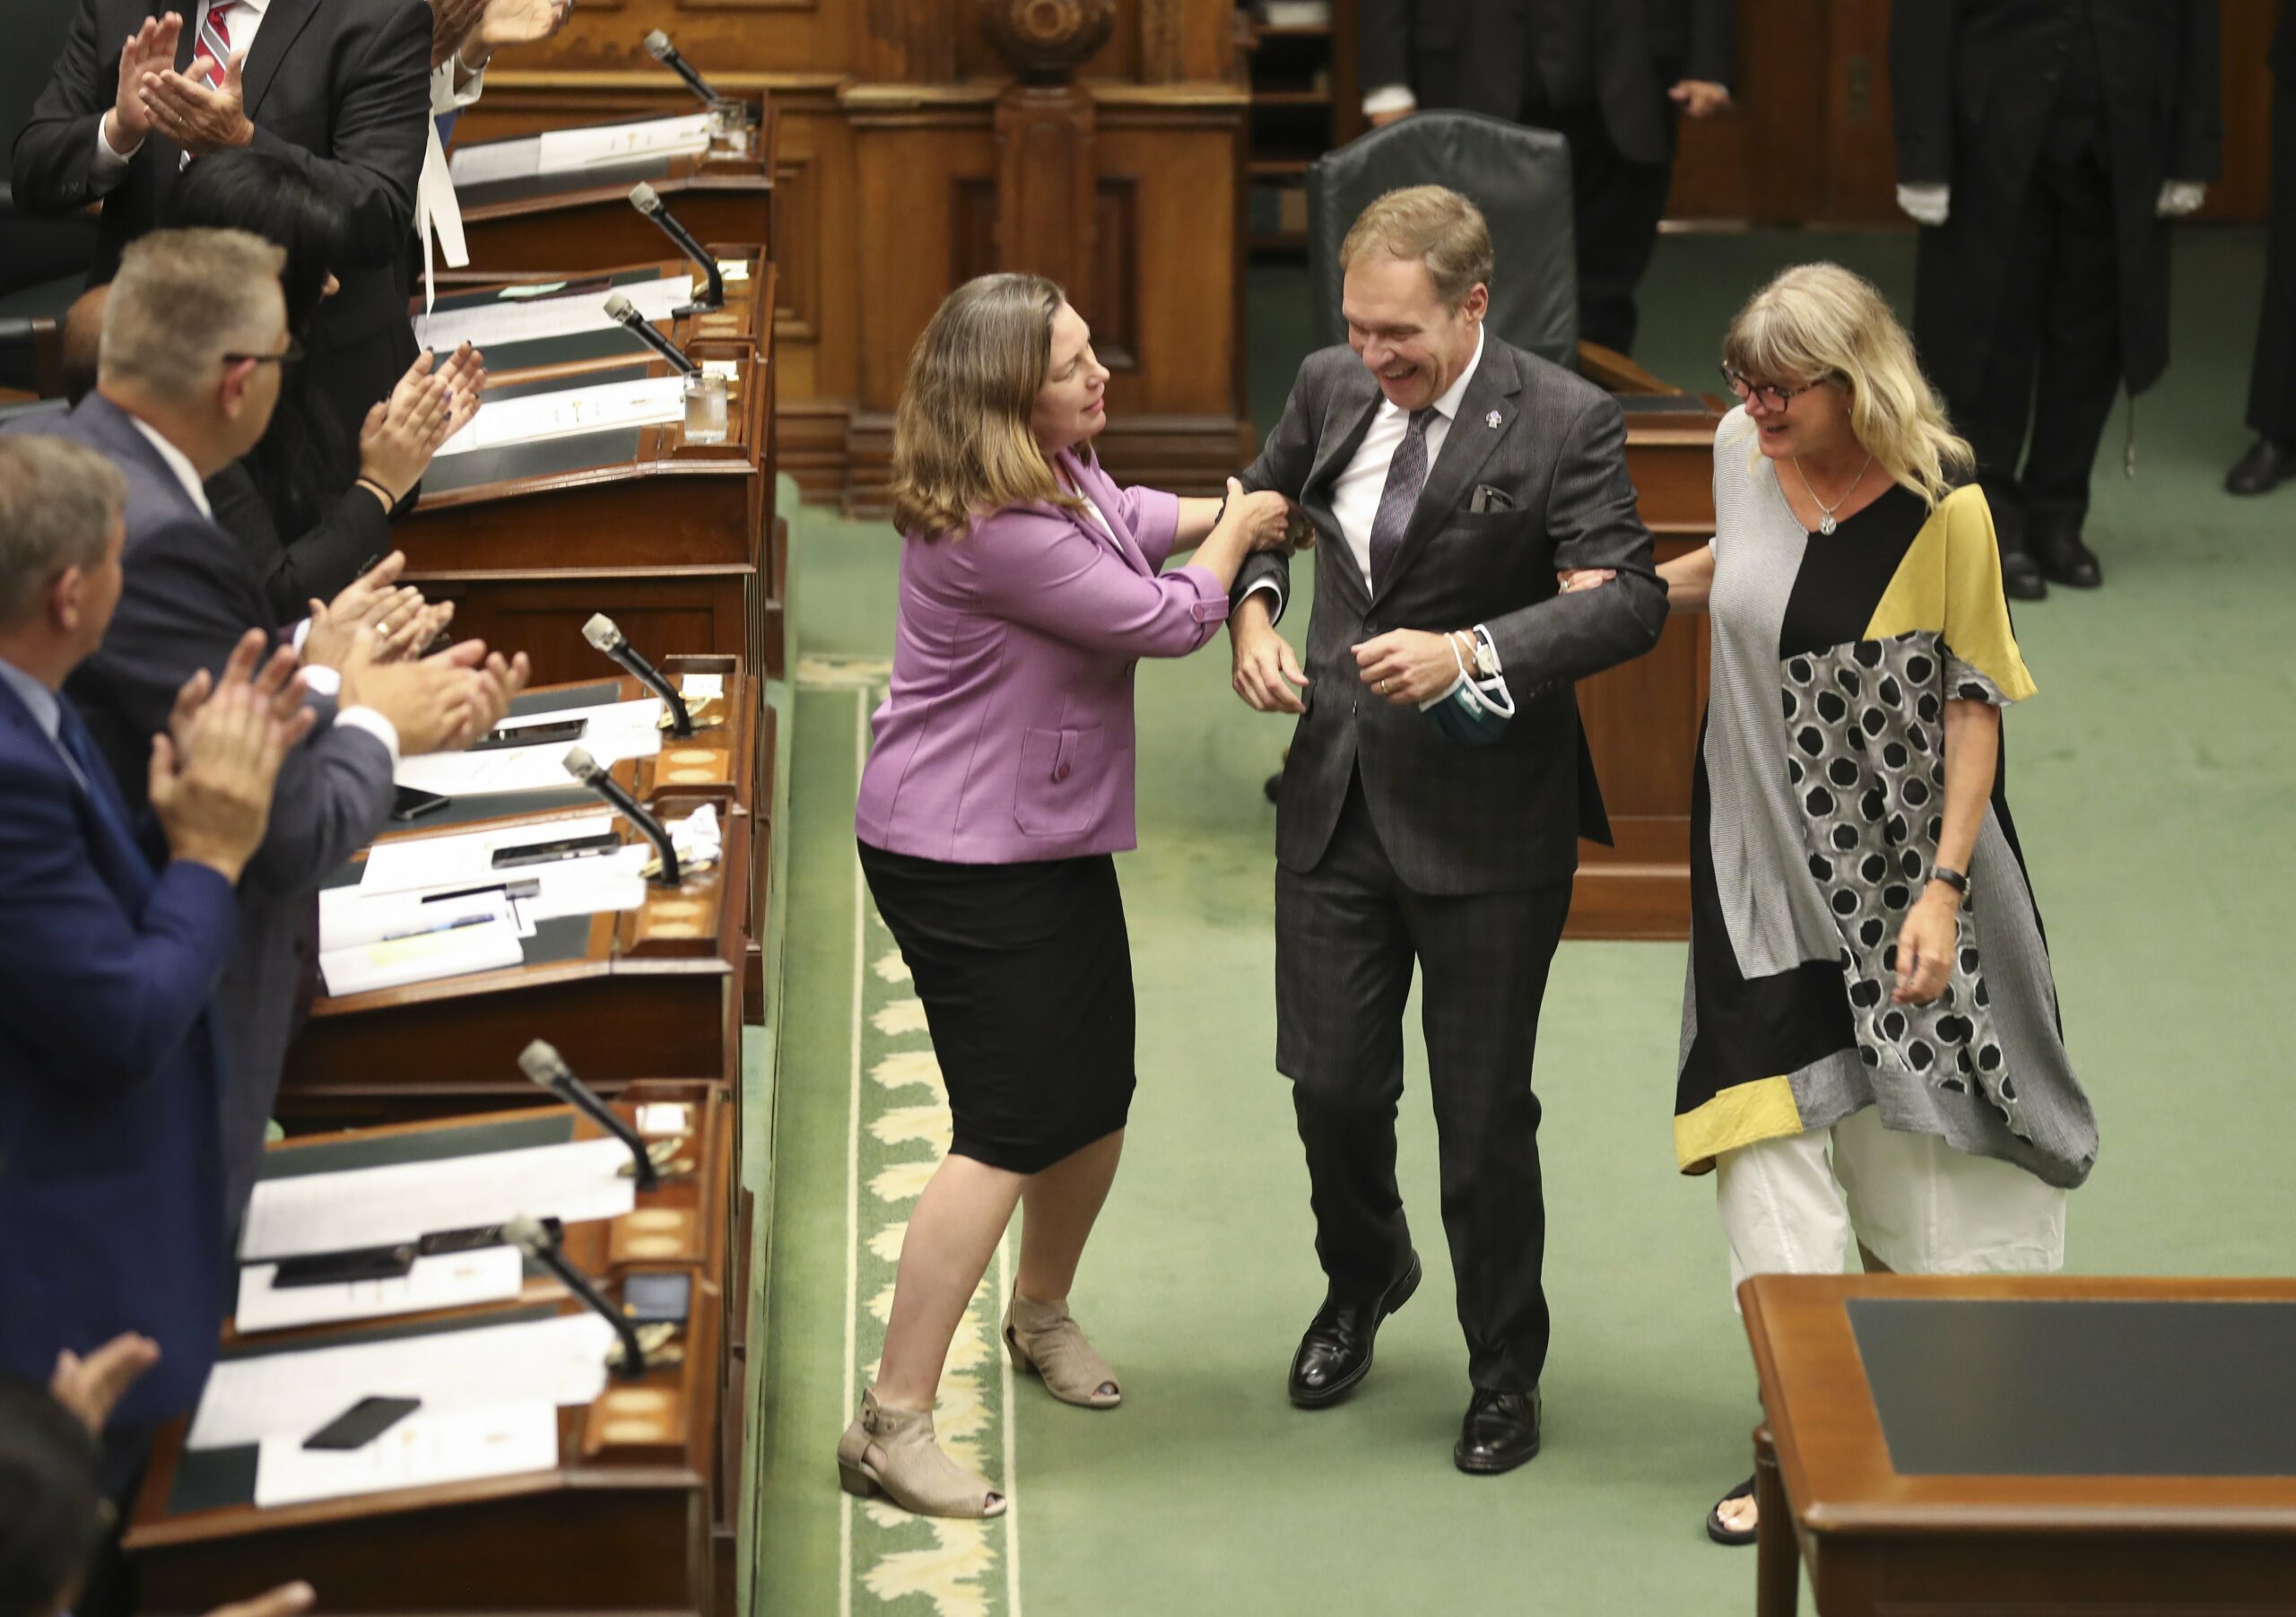 Liberal MPP taking long shot to try limiting Ontario's use of notwithstanding clause